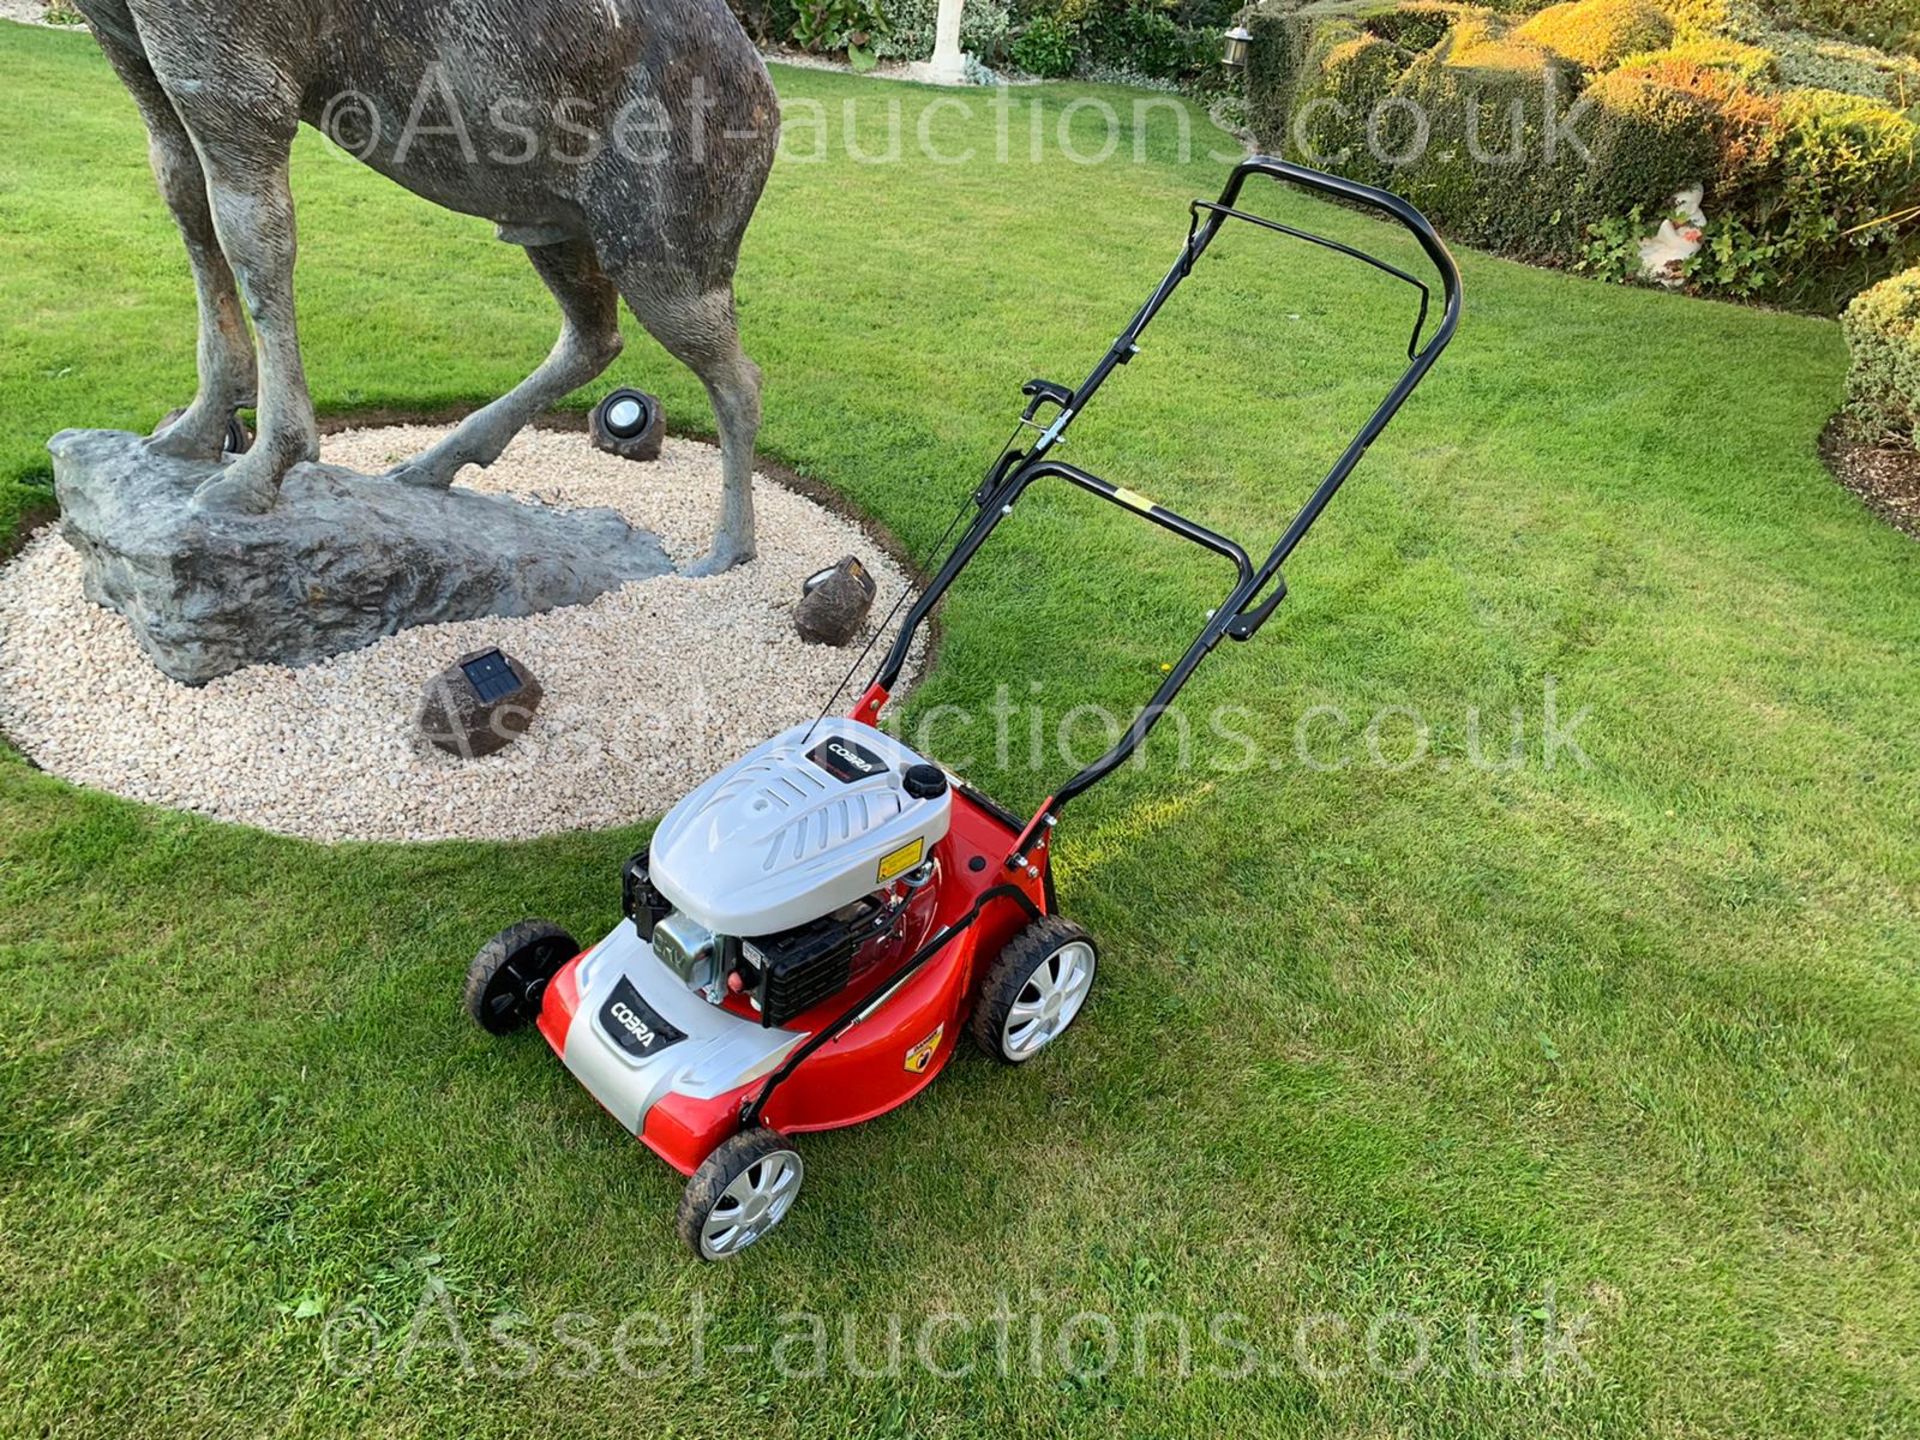 2016 COBRA M40C LAWN MOWER, RUNS AND WORKS WELL, ONLY USED A FEW TIMES, PULL START *NO VAT* - Image 3 of 18